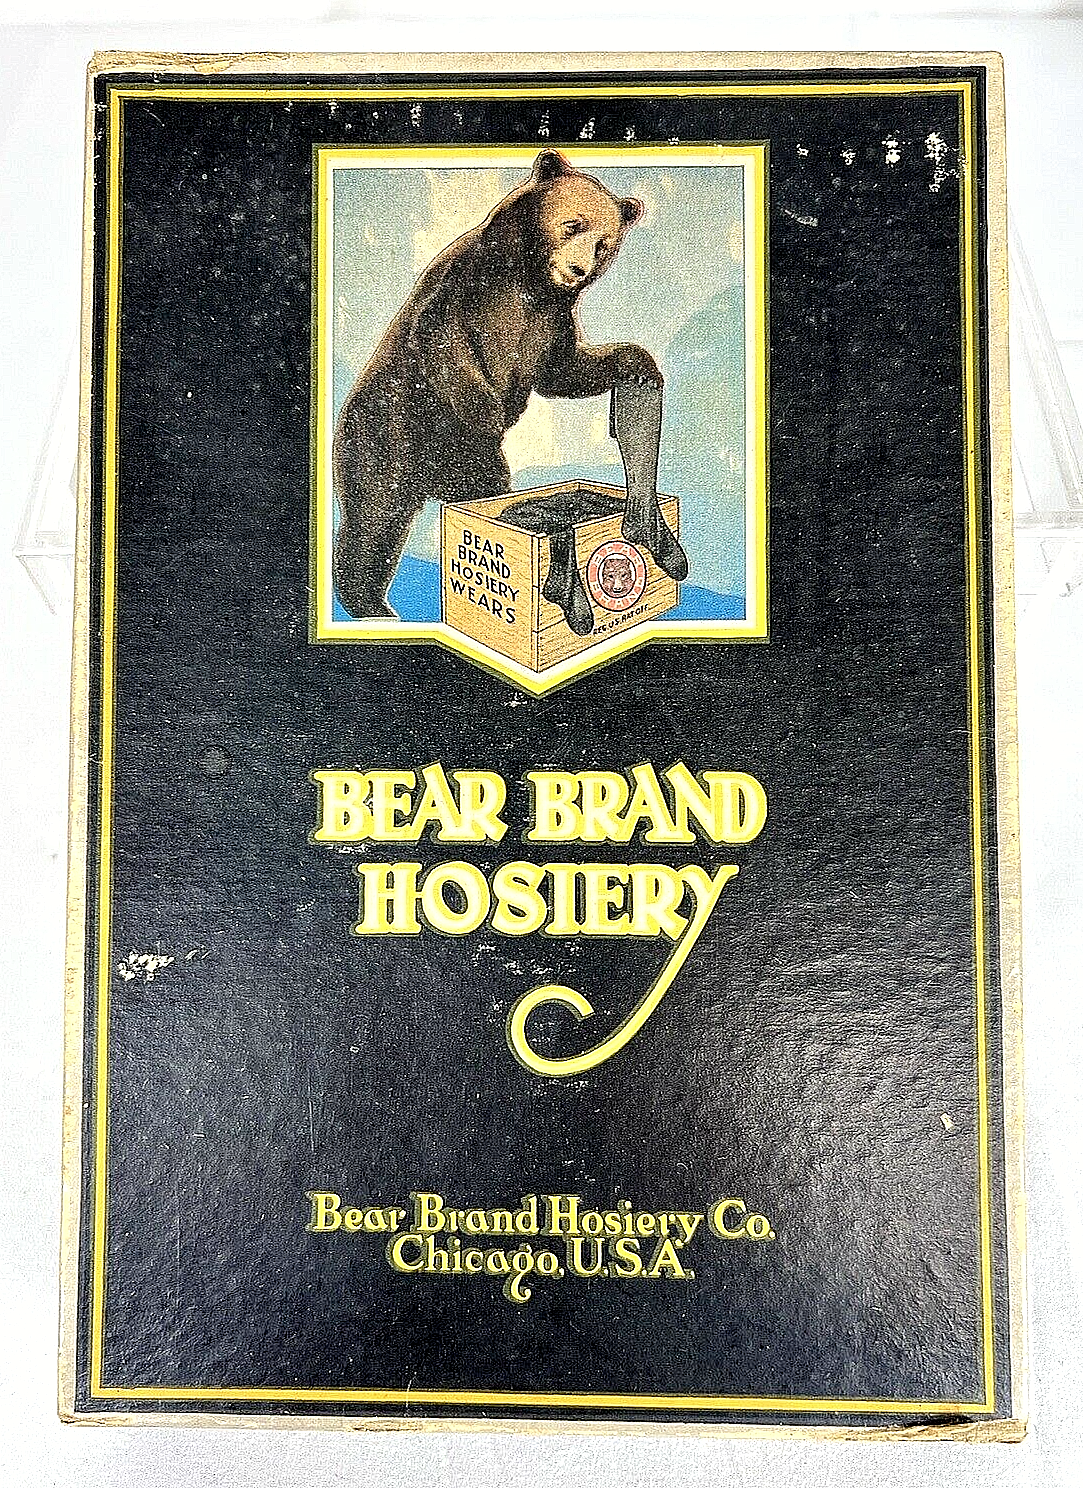 Primary image for Antique 1898 Cardboard Bear Brand Hosiery Box is Empty 1 1/2 x 6 1/2 x 9 1/2"